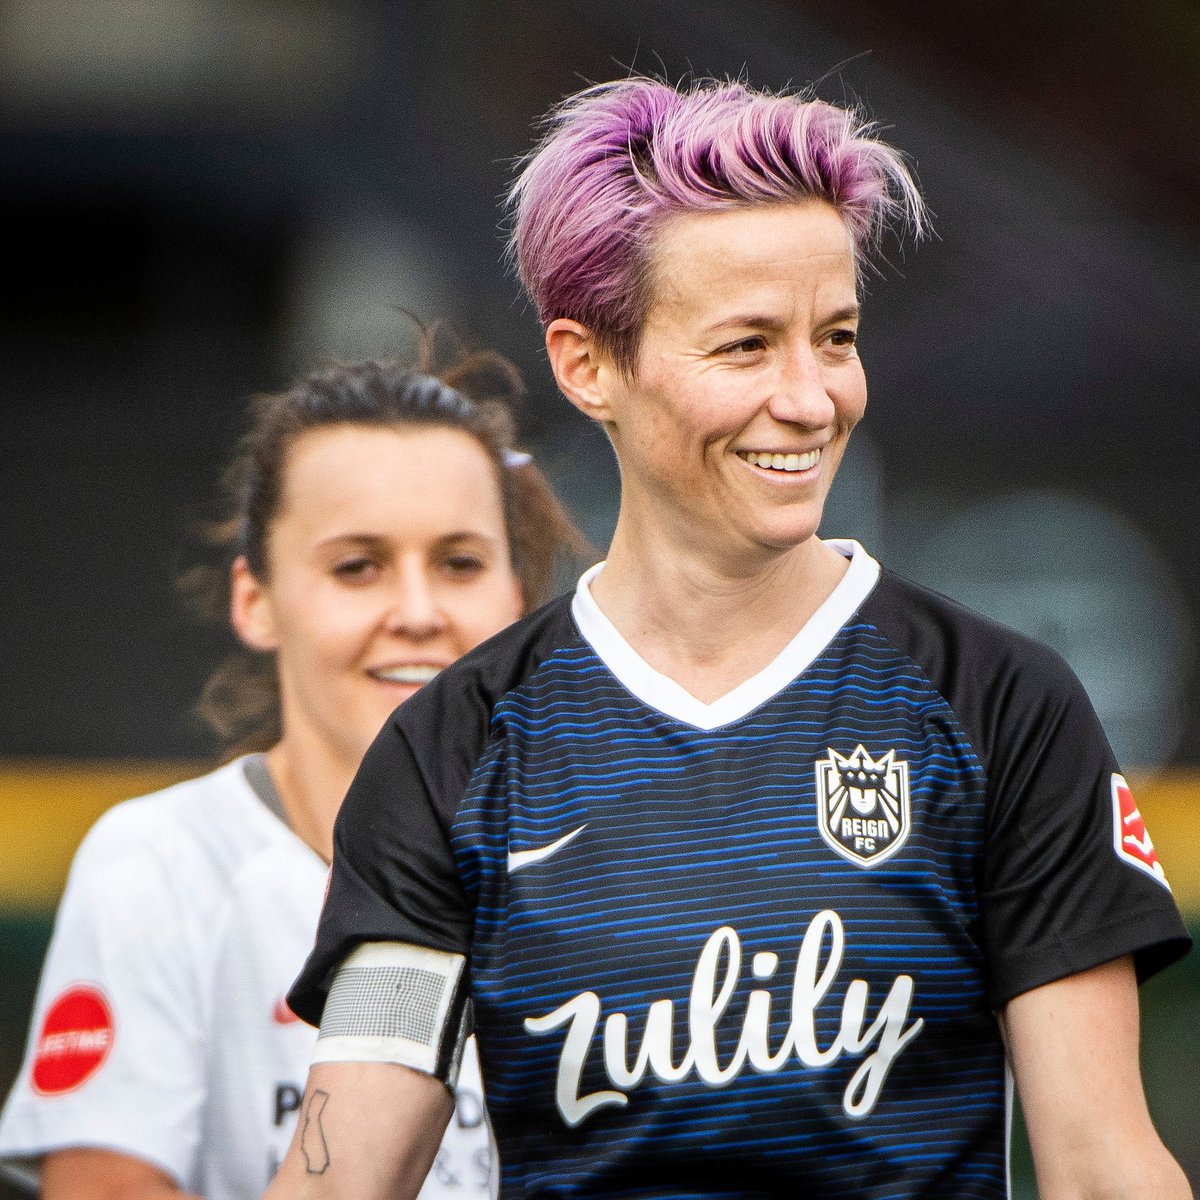 Megan may be most iconic for the INCREDIBLE USA soccer team, Seattle is still proud to call her one of their own as part of the Seattle Reign. The city has really embraced her with open arms